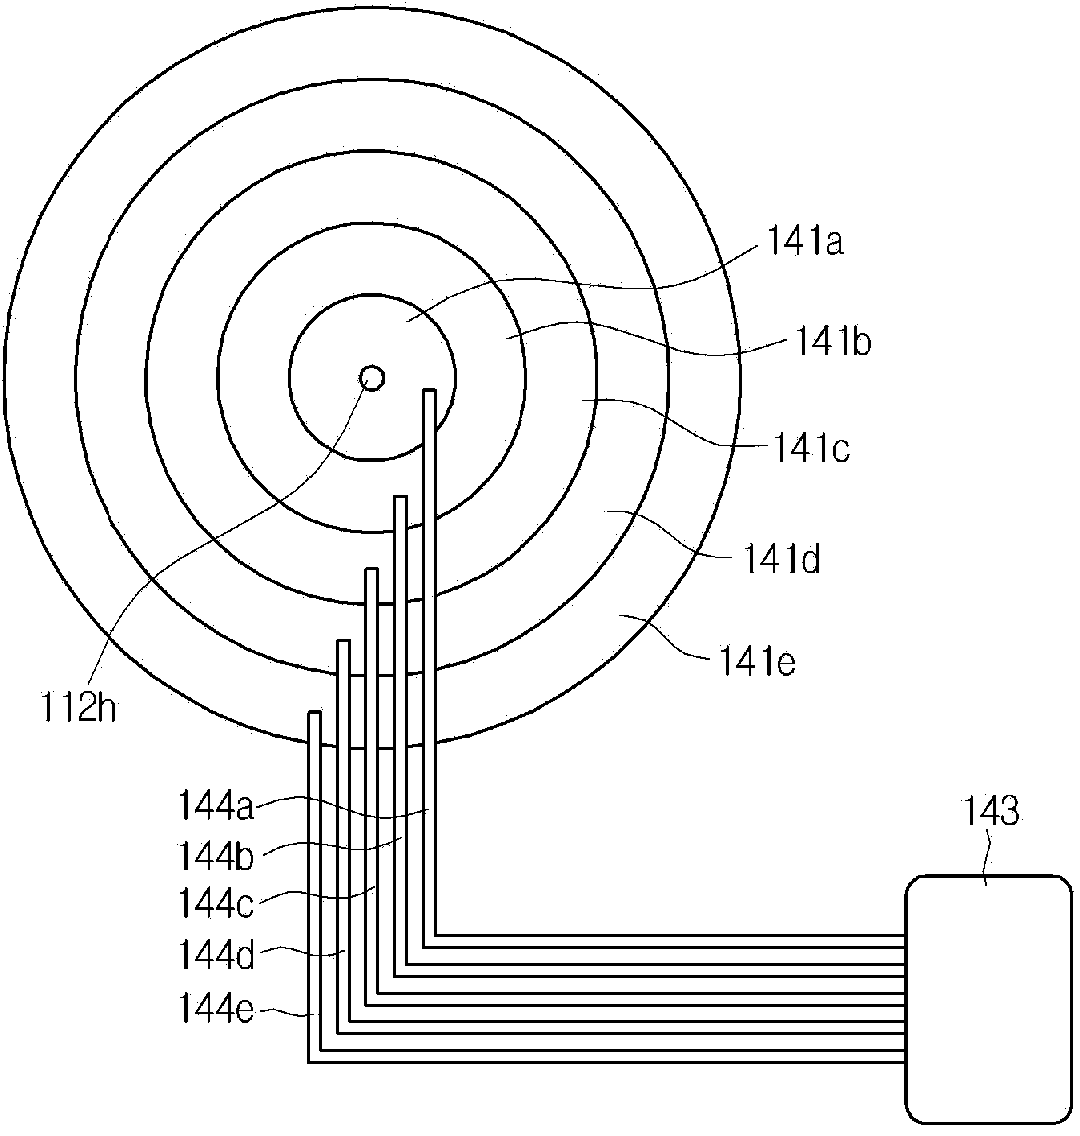 Apparatus for single wafer etching